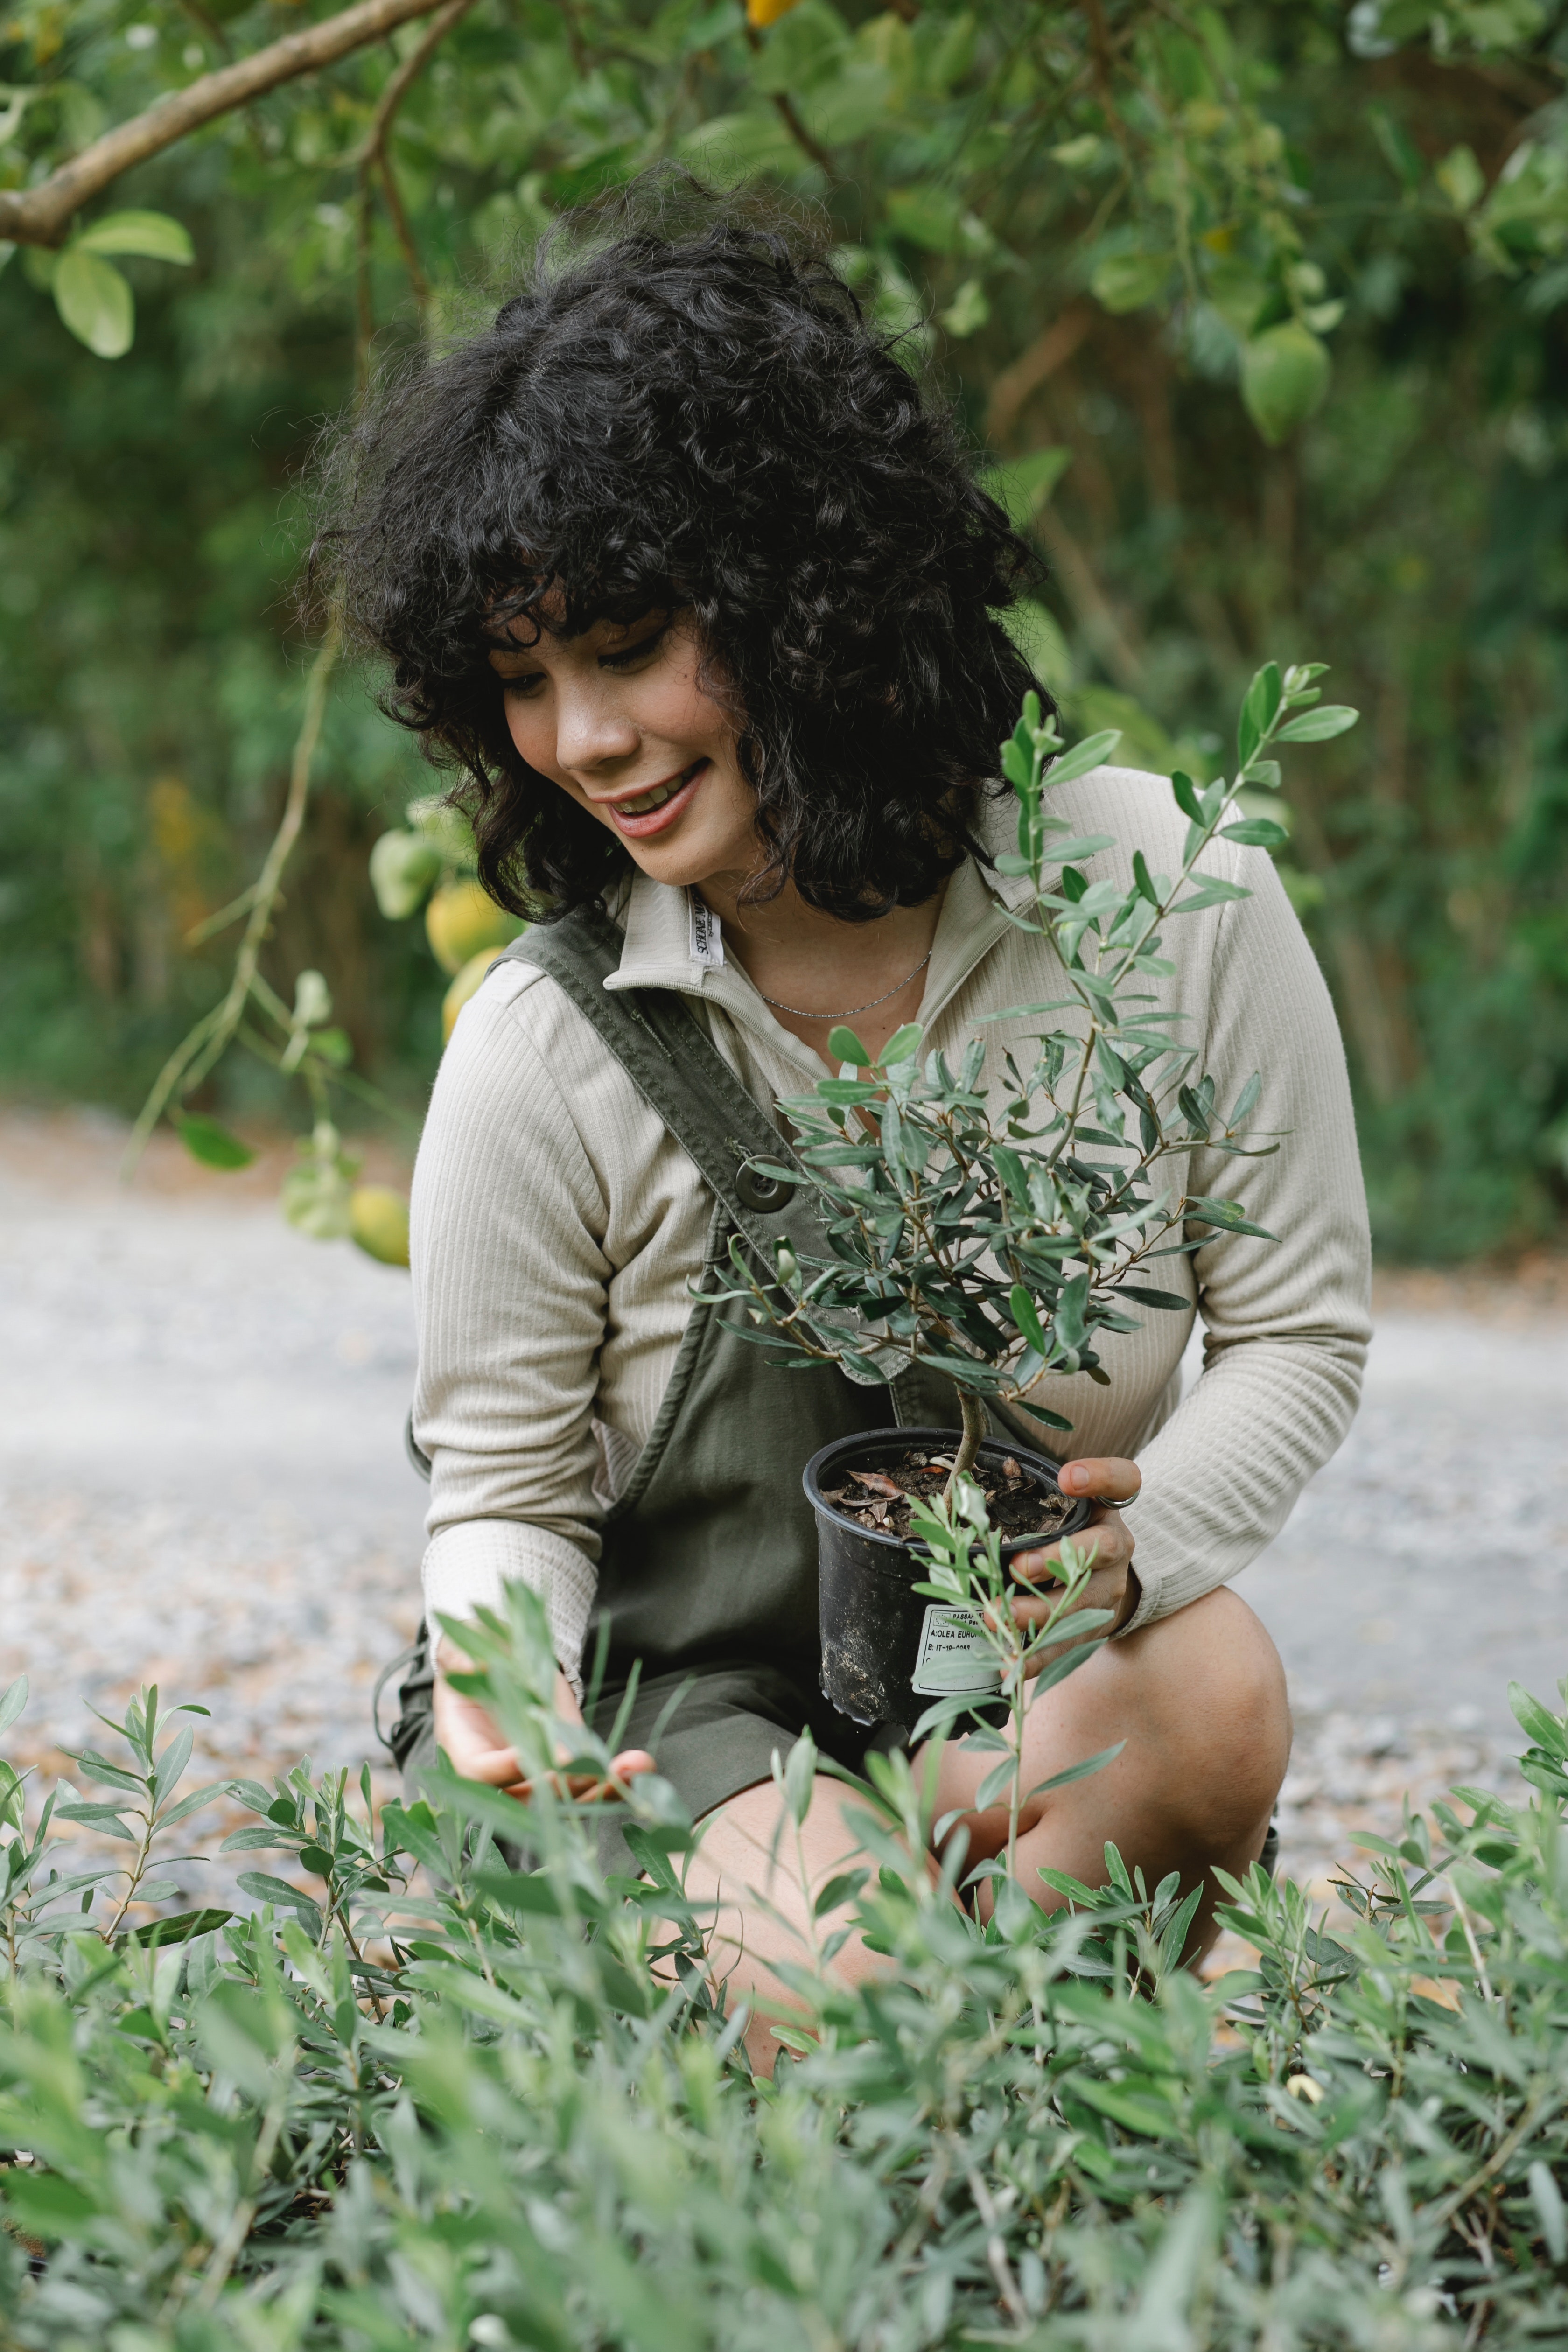 A young woman with dark, curly hair squats in front of a patch of garden holding a potted plant in her hand.